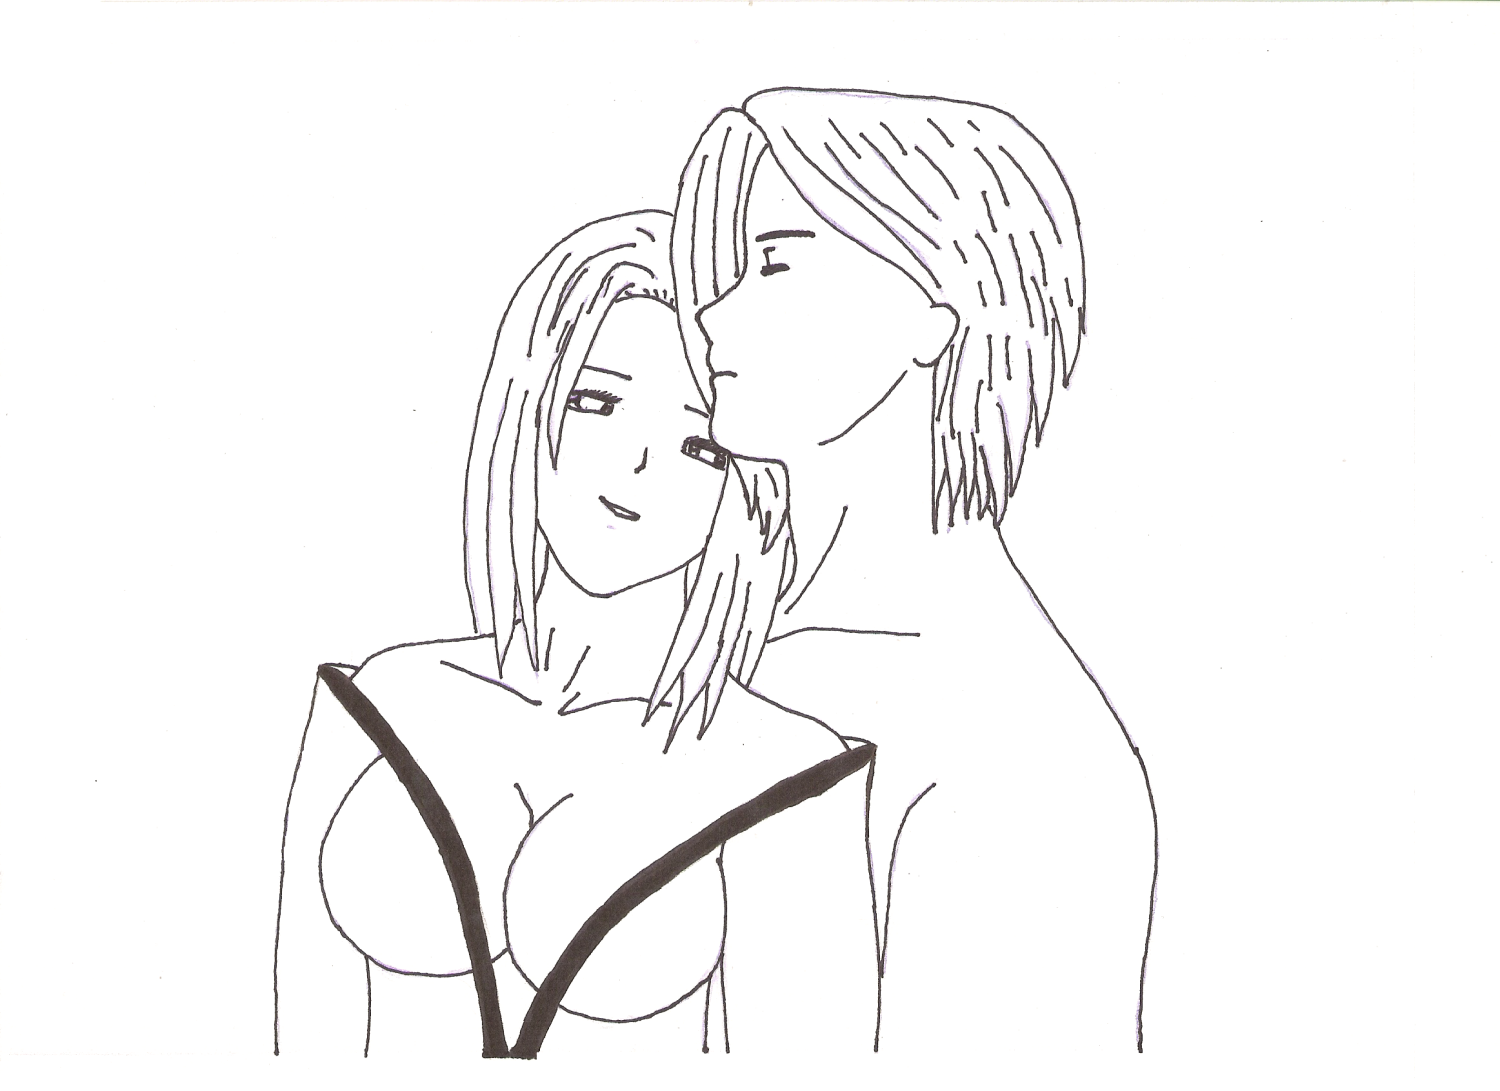 Amos &amp; Estelle Embracing Each Other (Uncolored) by forevereternal09